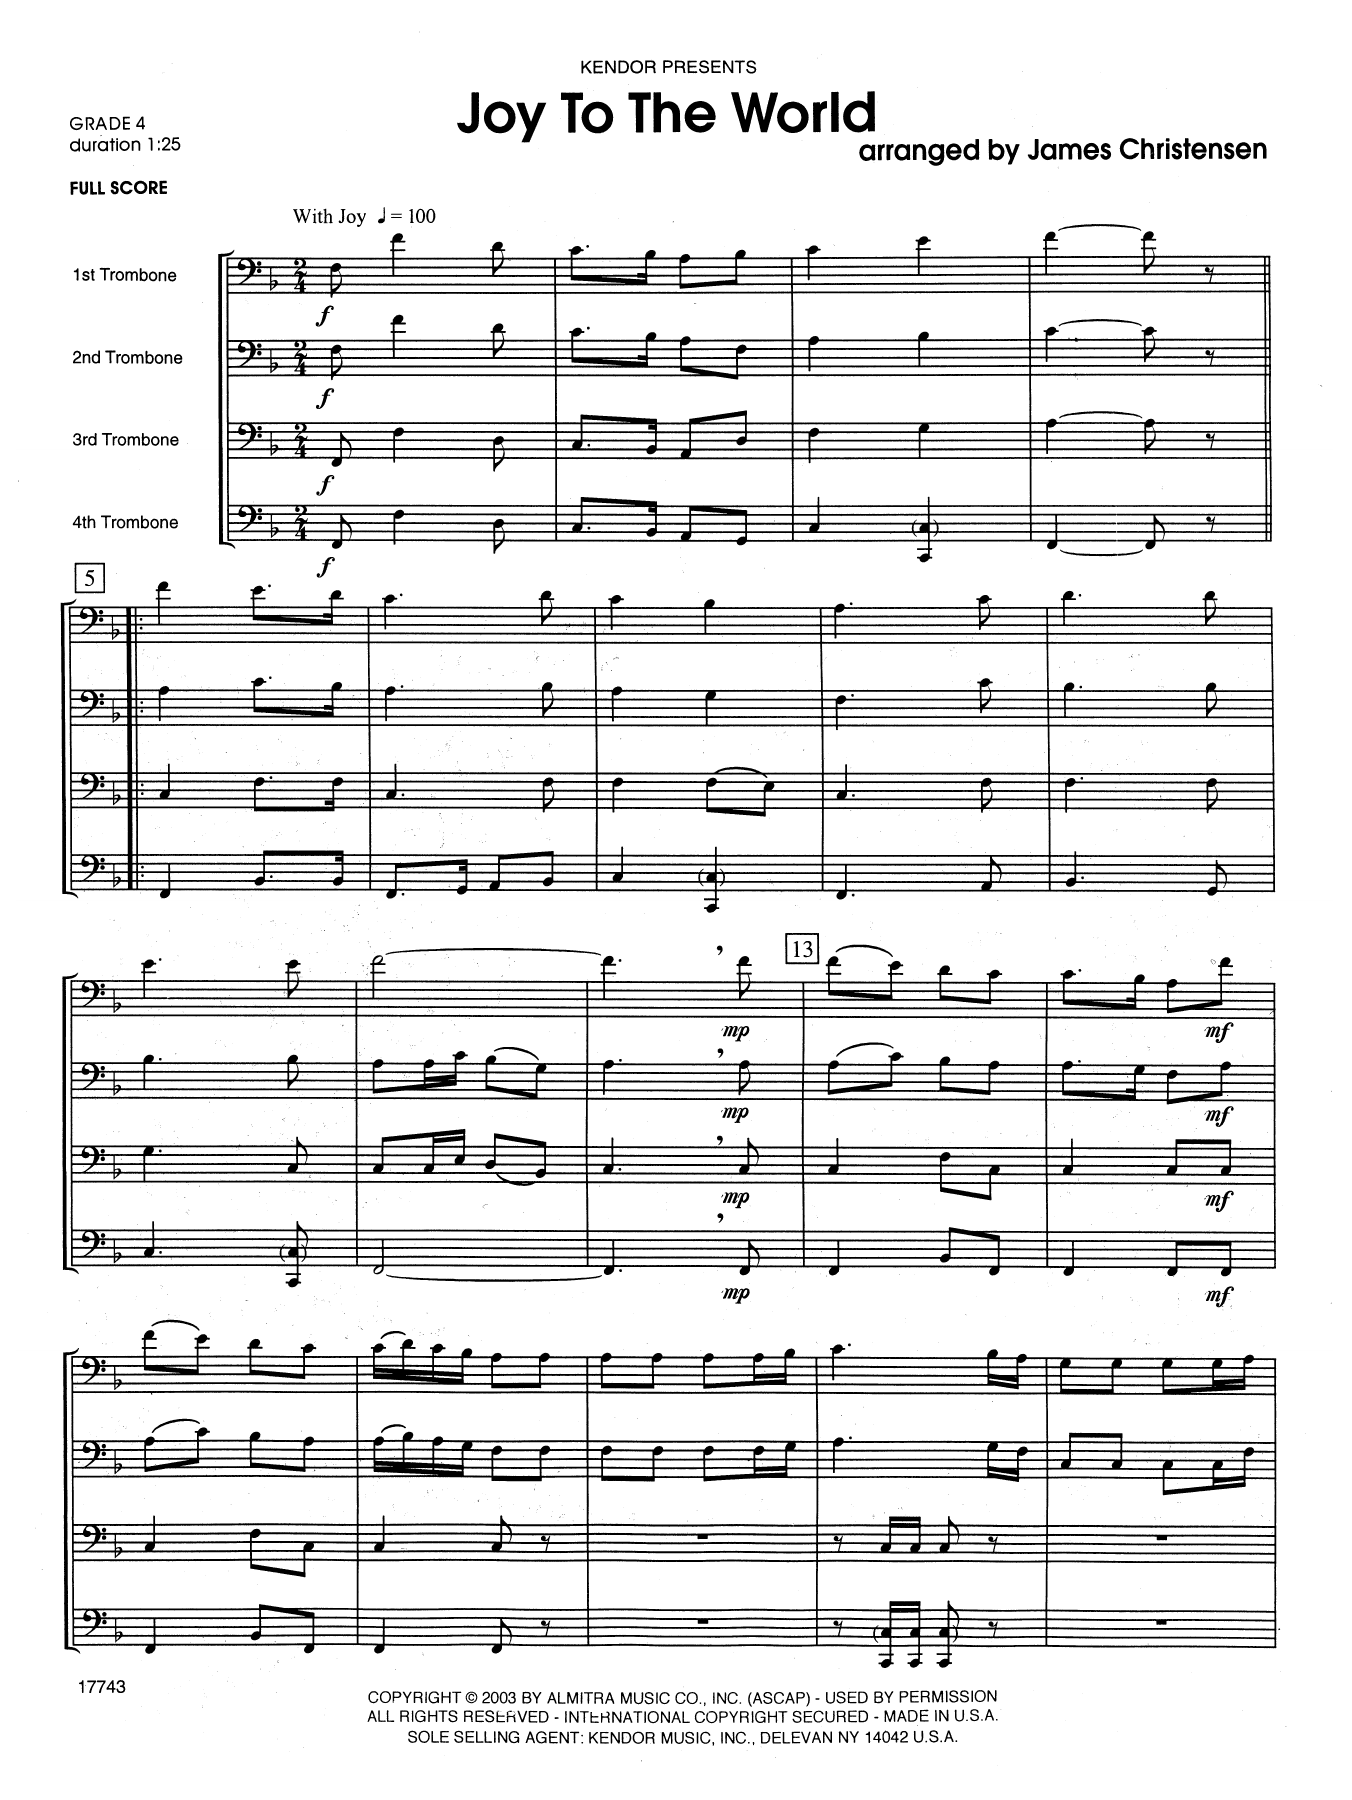 James Christensen Joy to the World - Full Score sheet music notes and chords. Download Printable PDF.